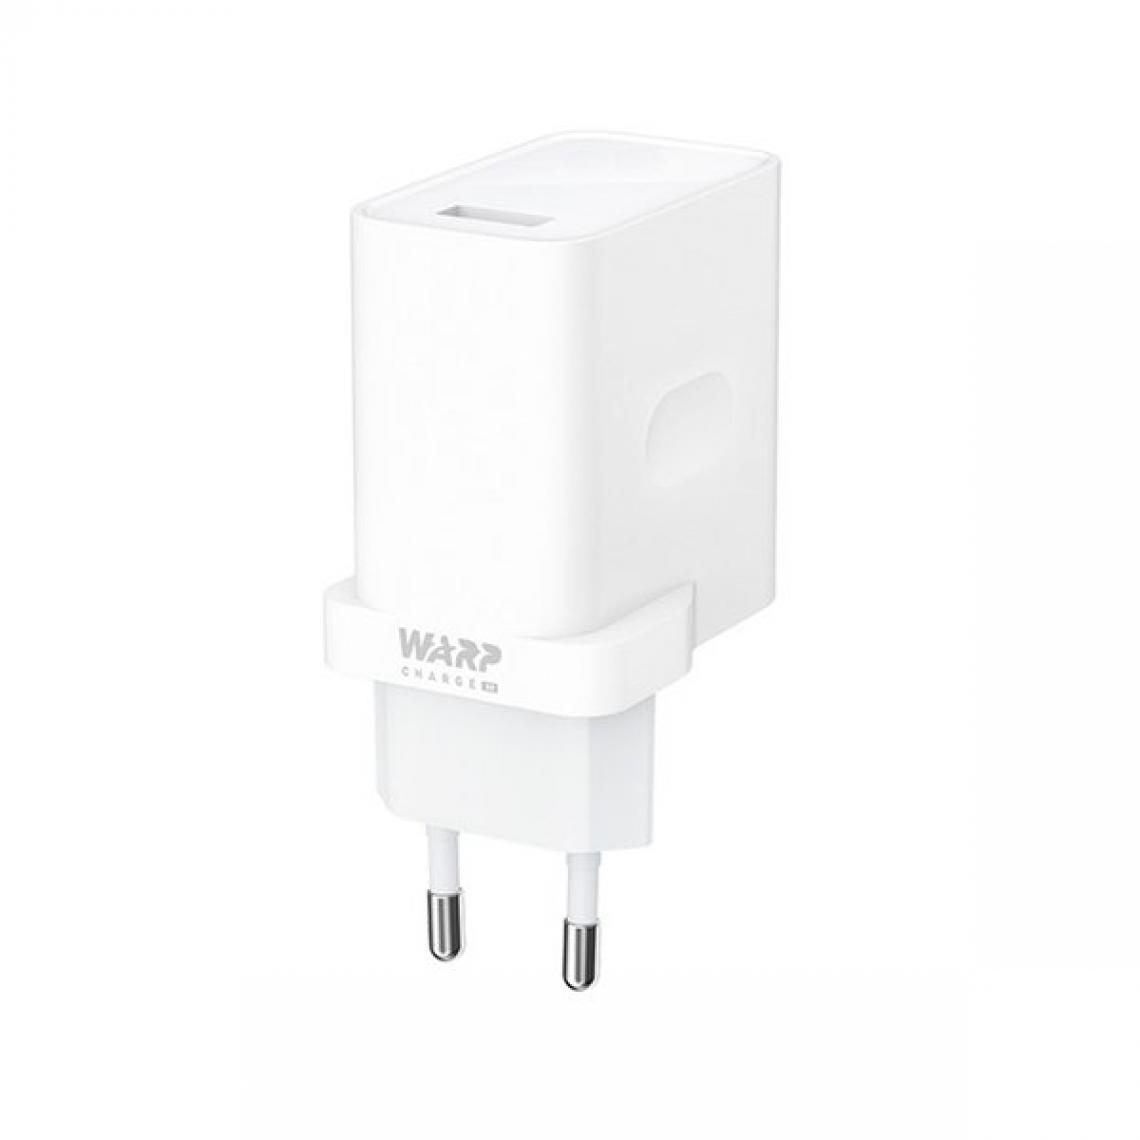 Phonecare - Chargeur Warp Charge 30 Fast Charge Power Adapter pour OnePlus 8T - Autres accessoires smartphone